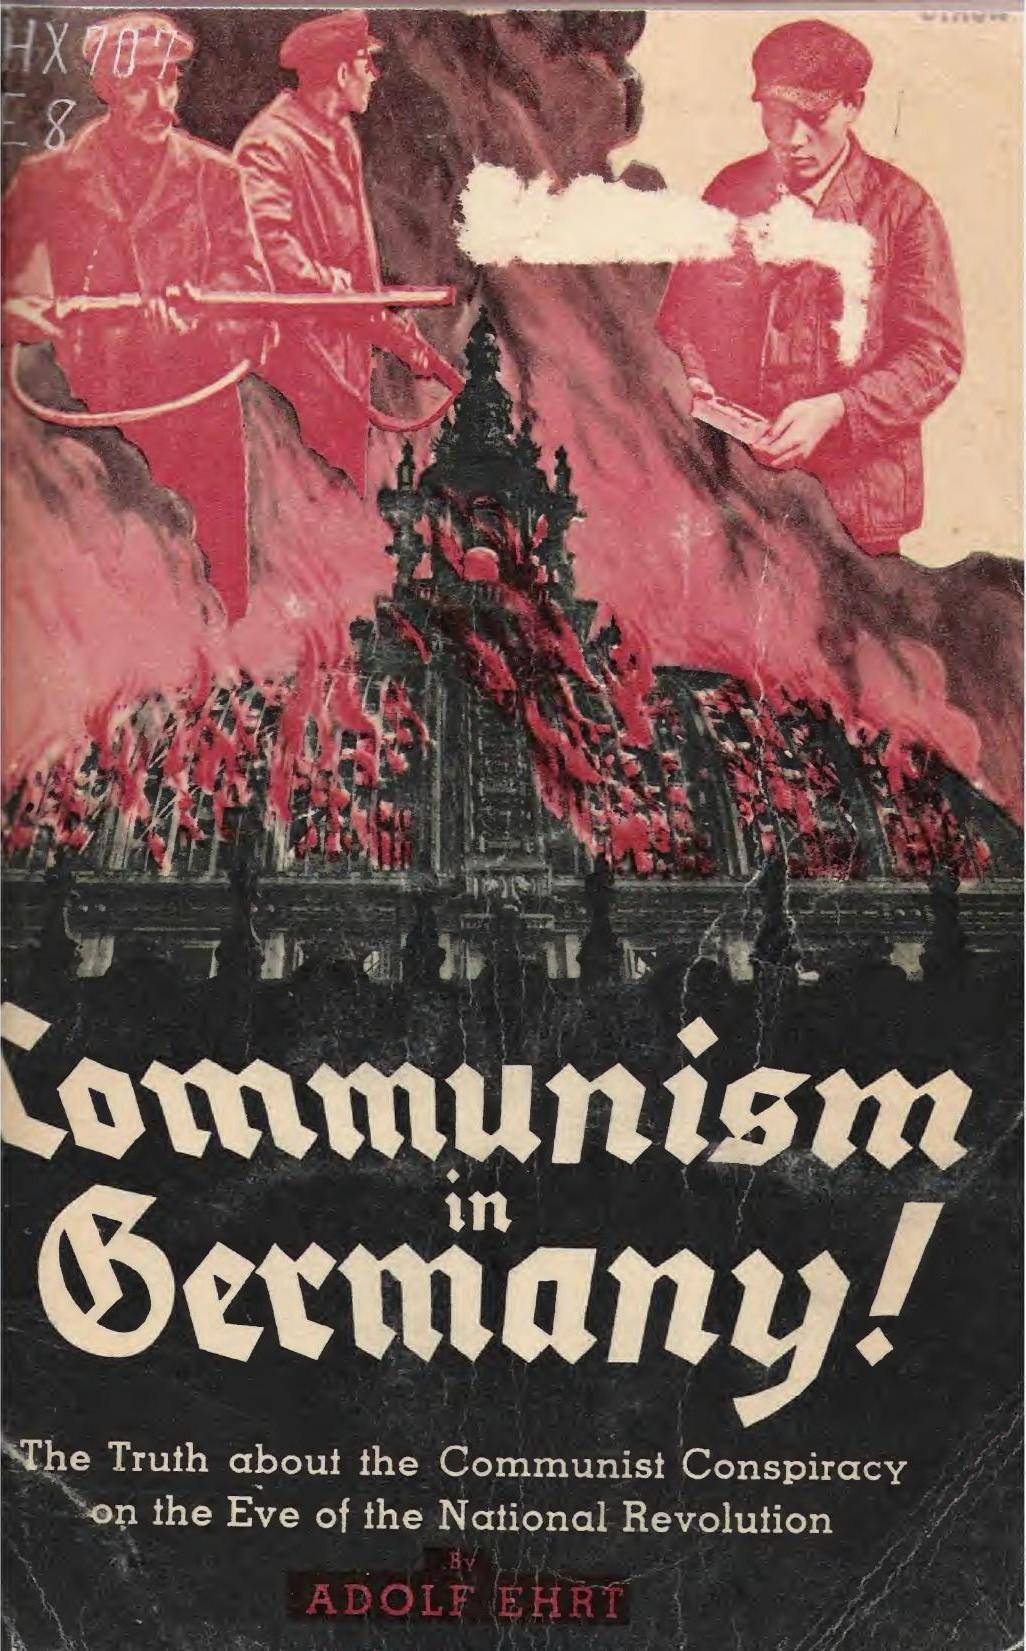 Communism in Germany - The Truth about the Communist Conspiracy on the Eve of the National Revolution (1933) by Adolf Ehrt